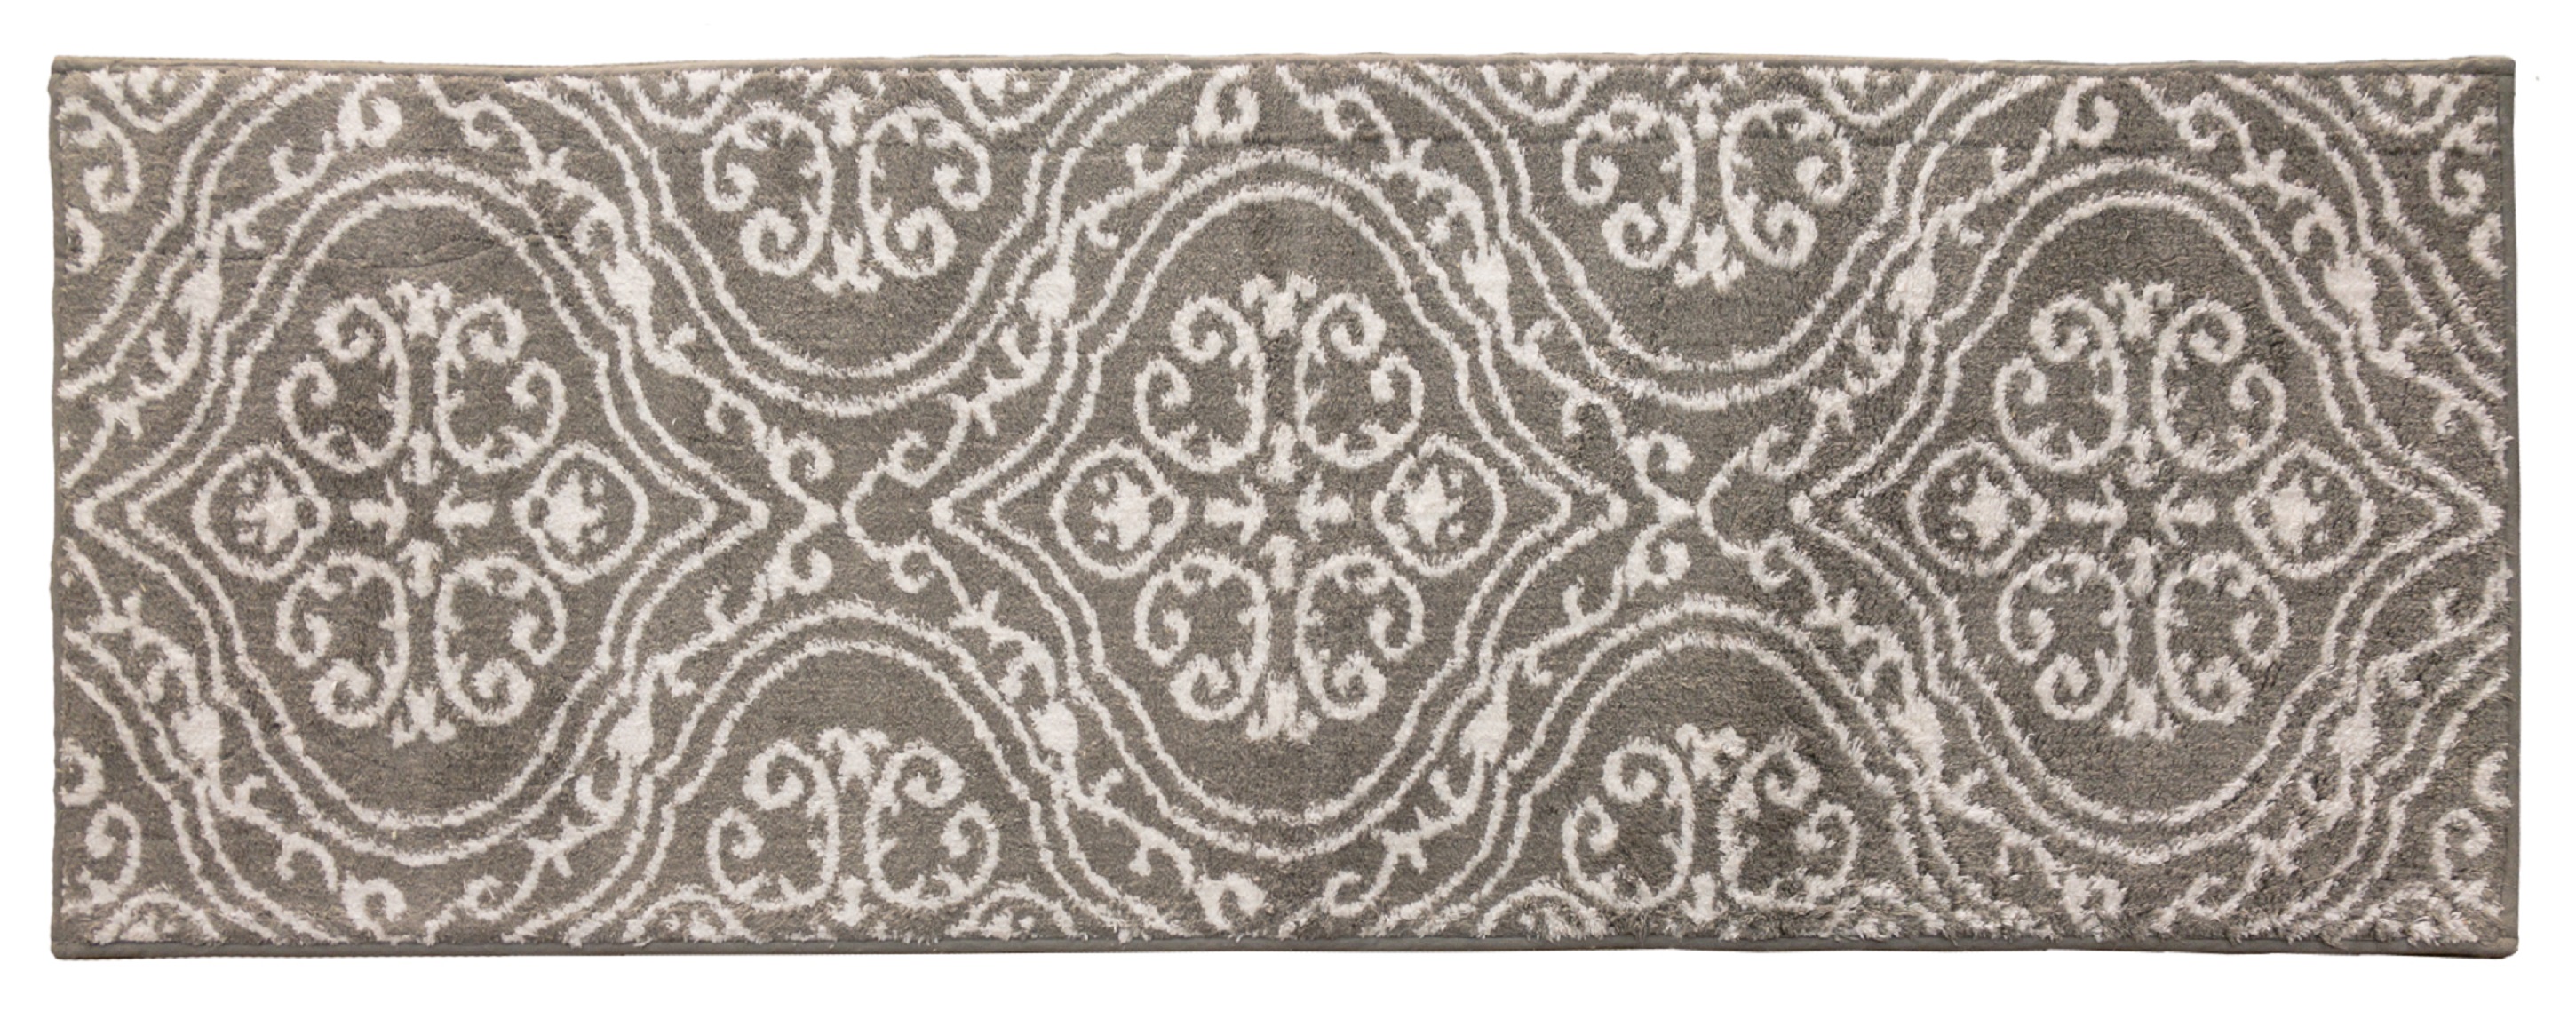 Addy home Medallion Collection 100 % cotton Non-skid Plush Bath Runner, Oversized Bath Rug - Silver Grey, 22" x 60" - image 2 of 3